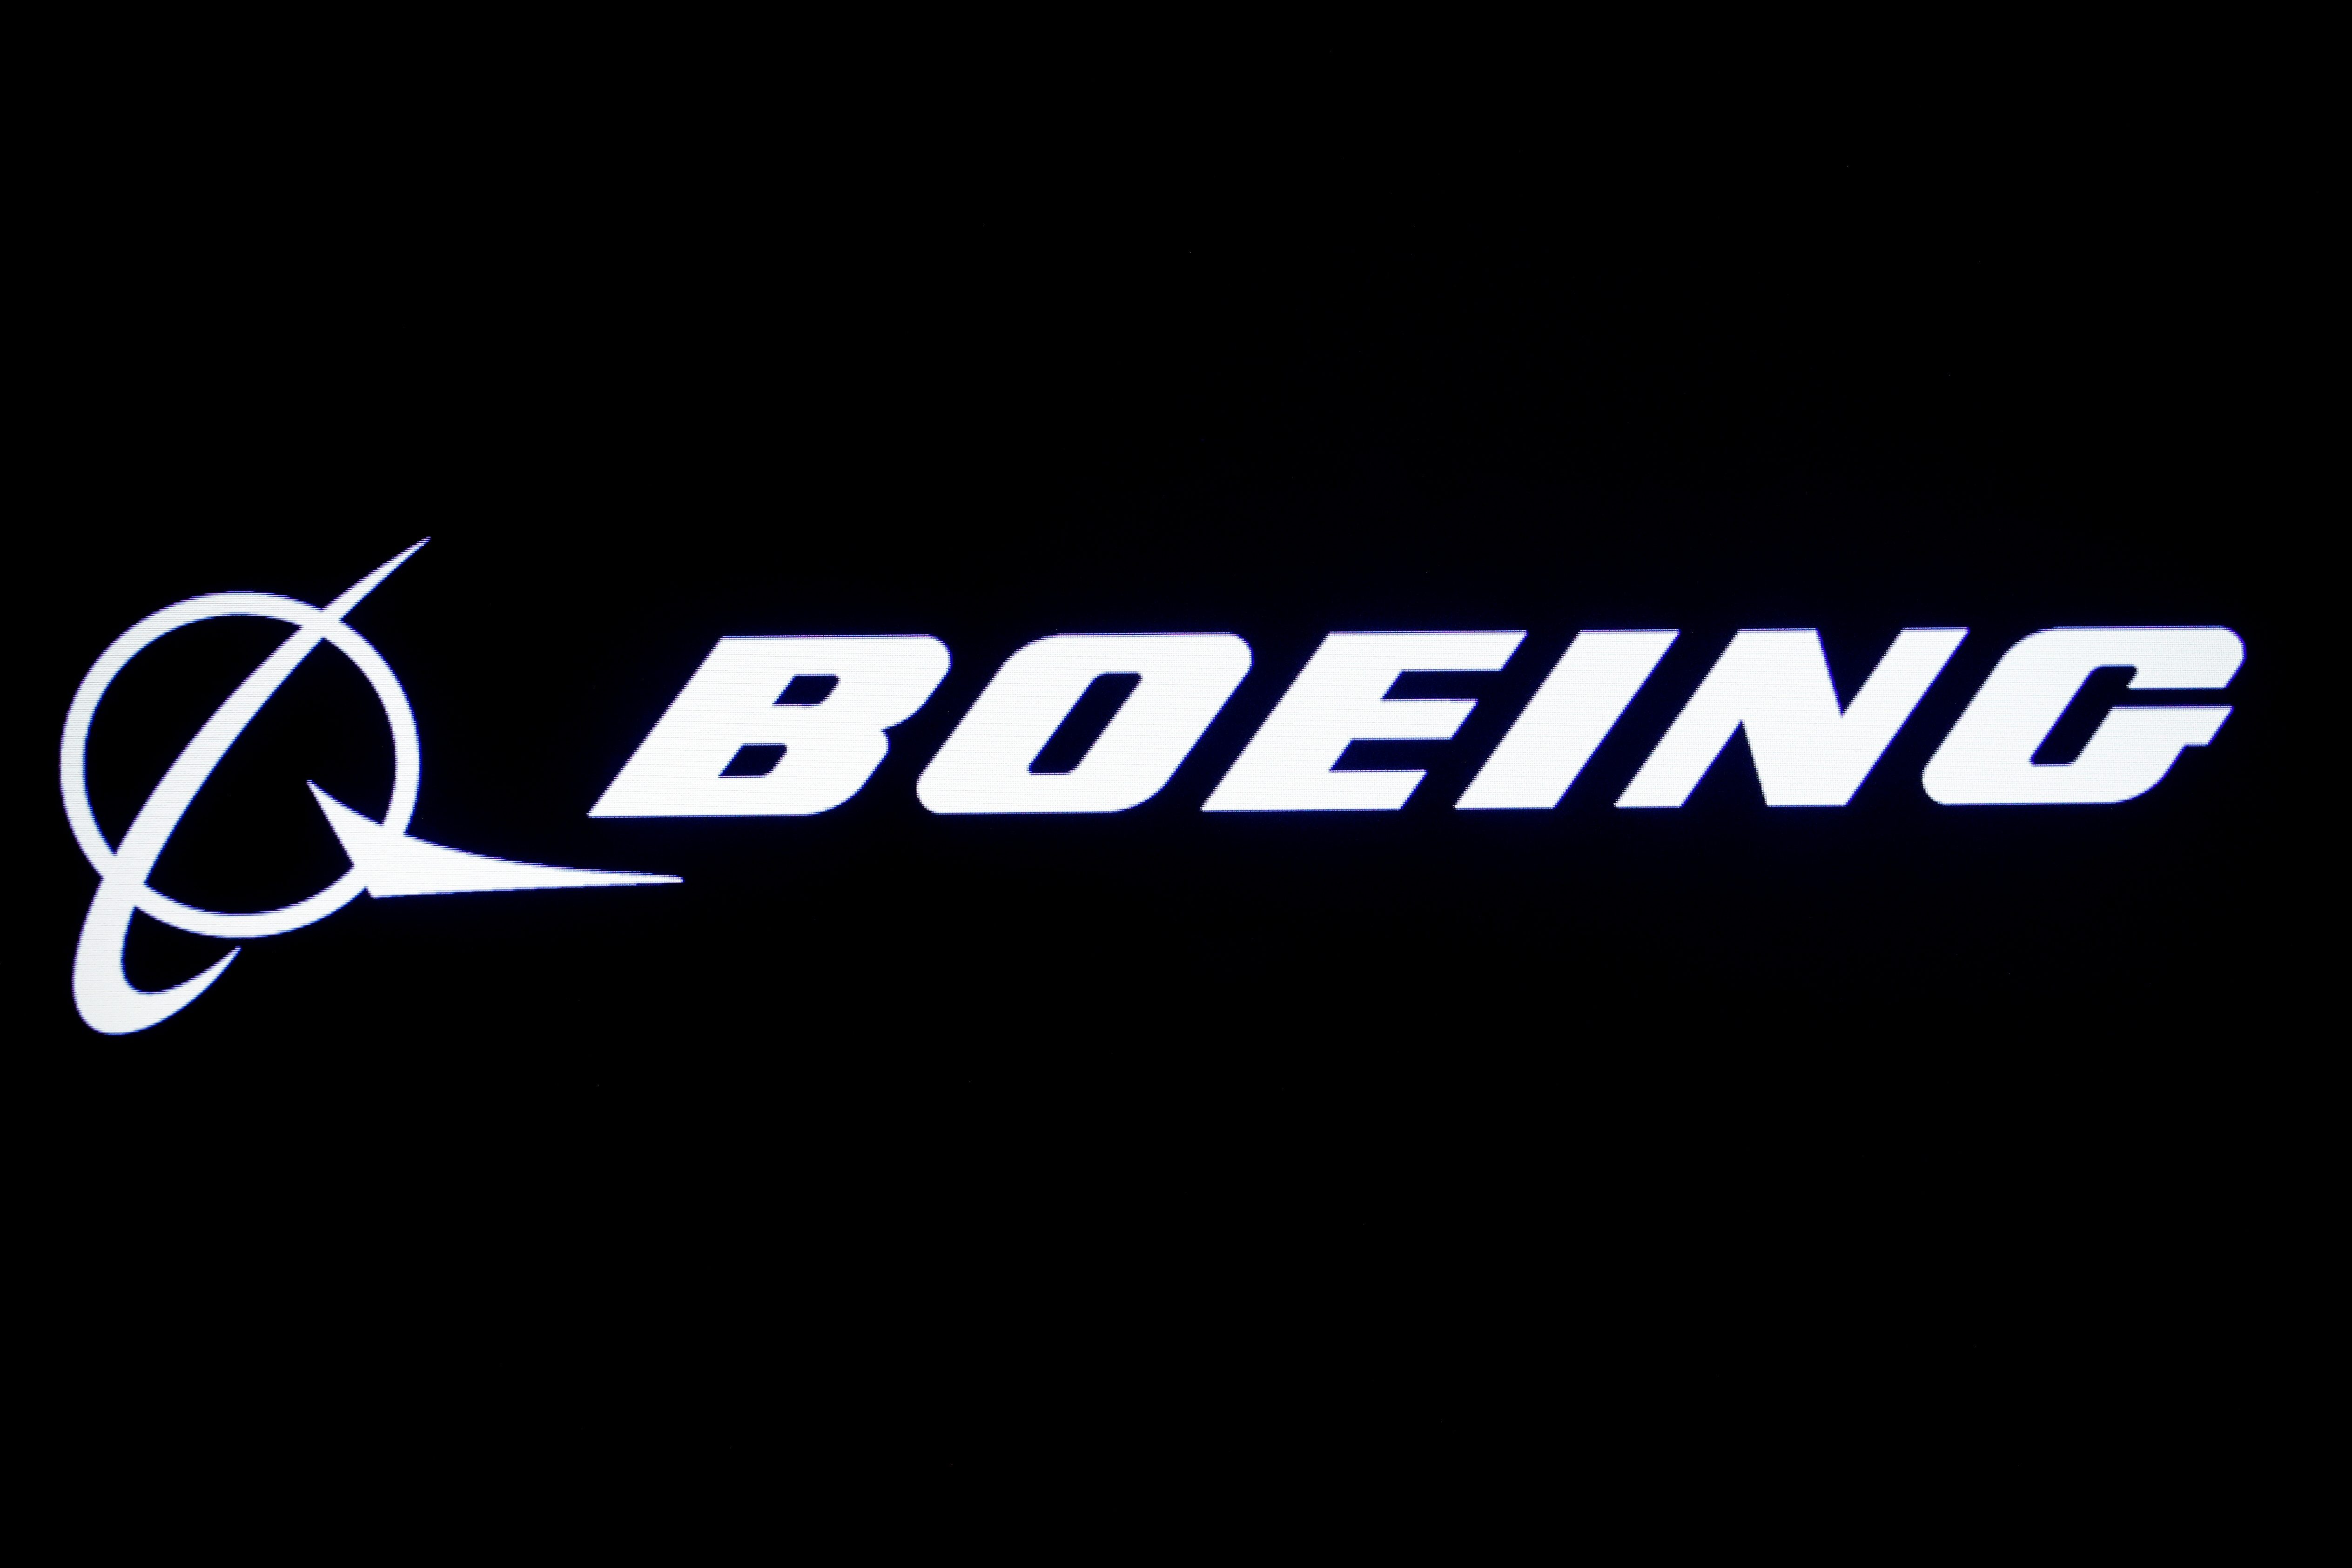 Boeing cuts 787 production, suffers 737 MAX cancellation